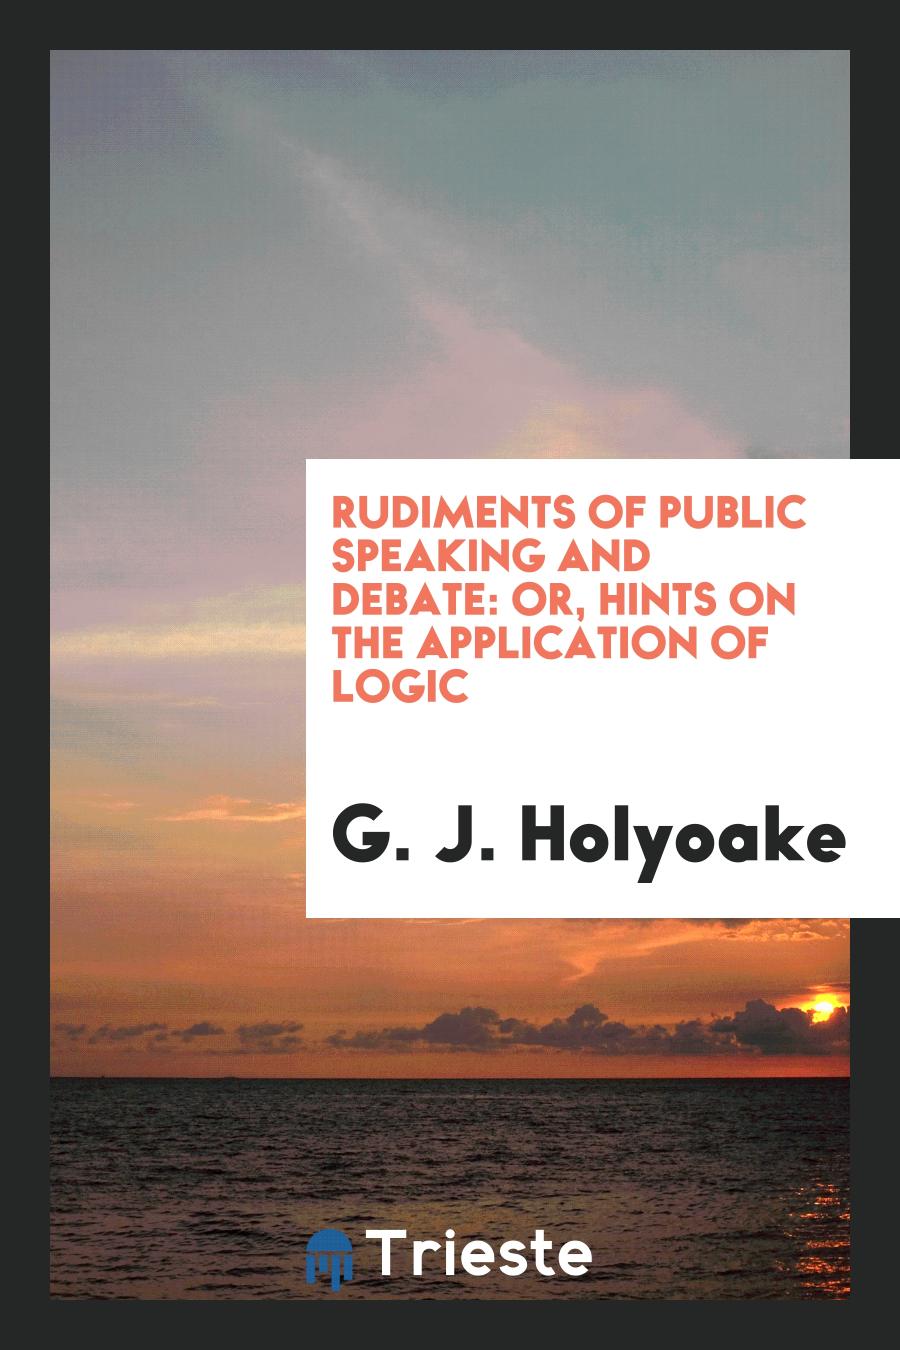 Rudiments of Public Speaking and Debate: Or, Hints on the Application of Logic